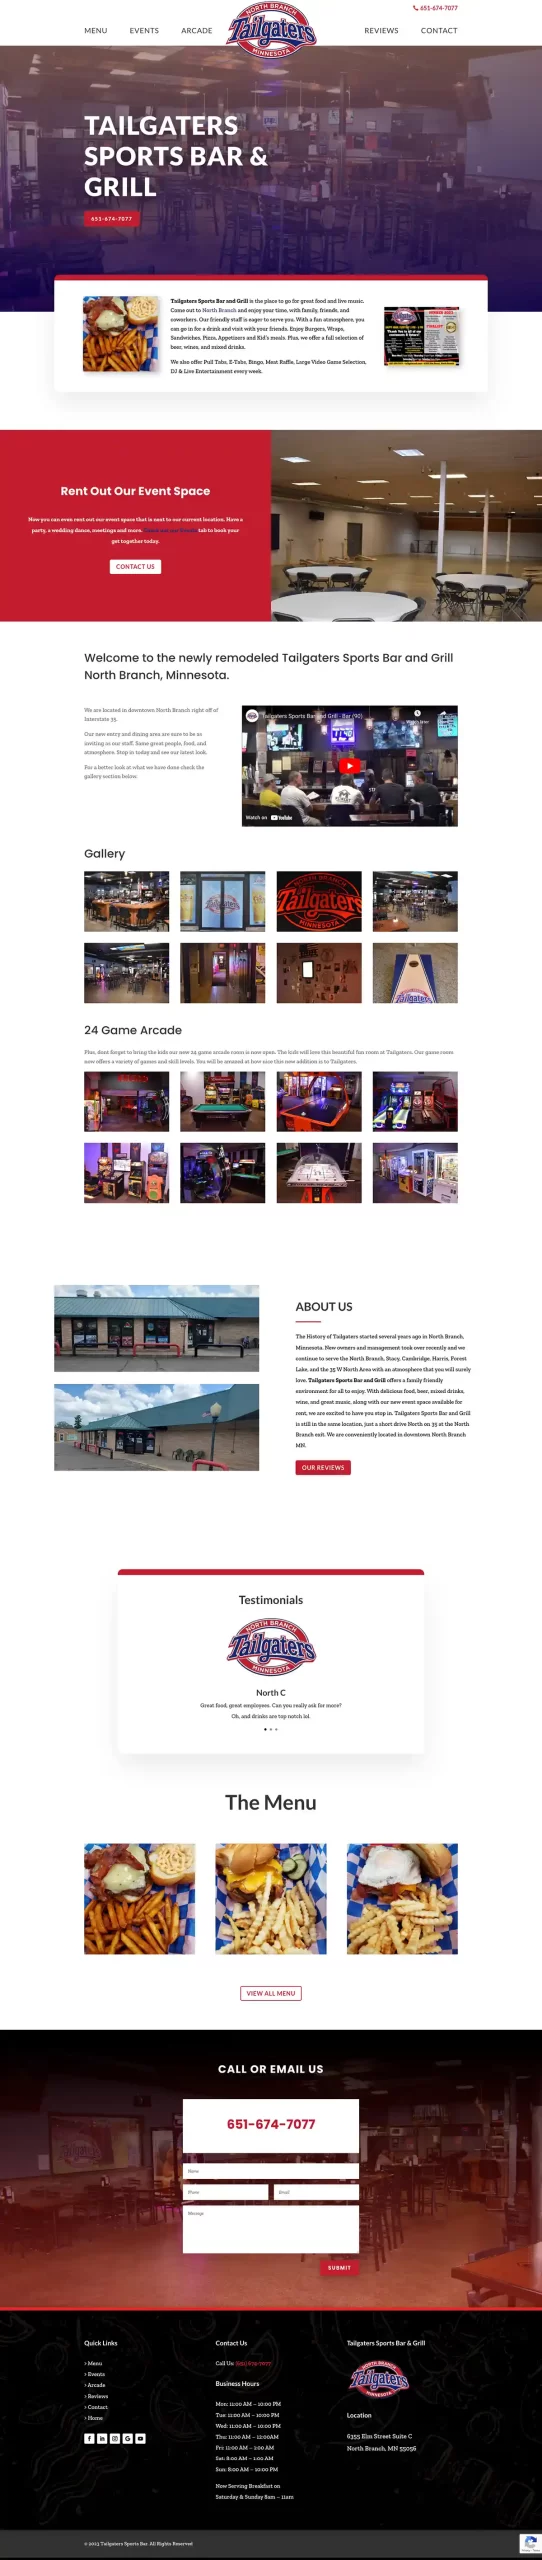 tailgaters sports bar & grill website design 2